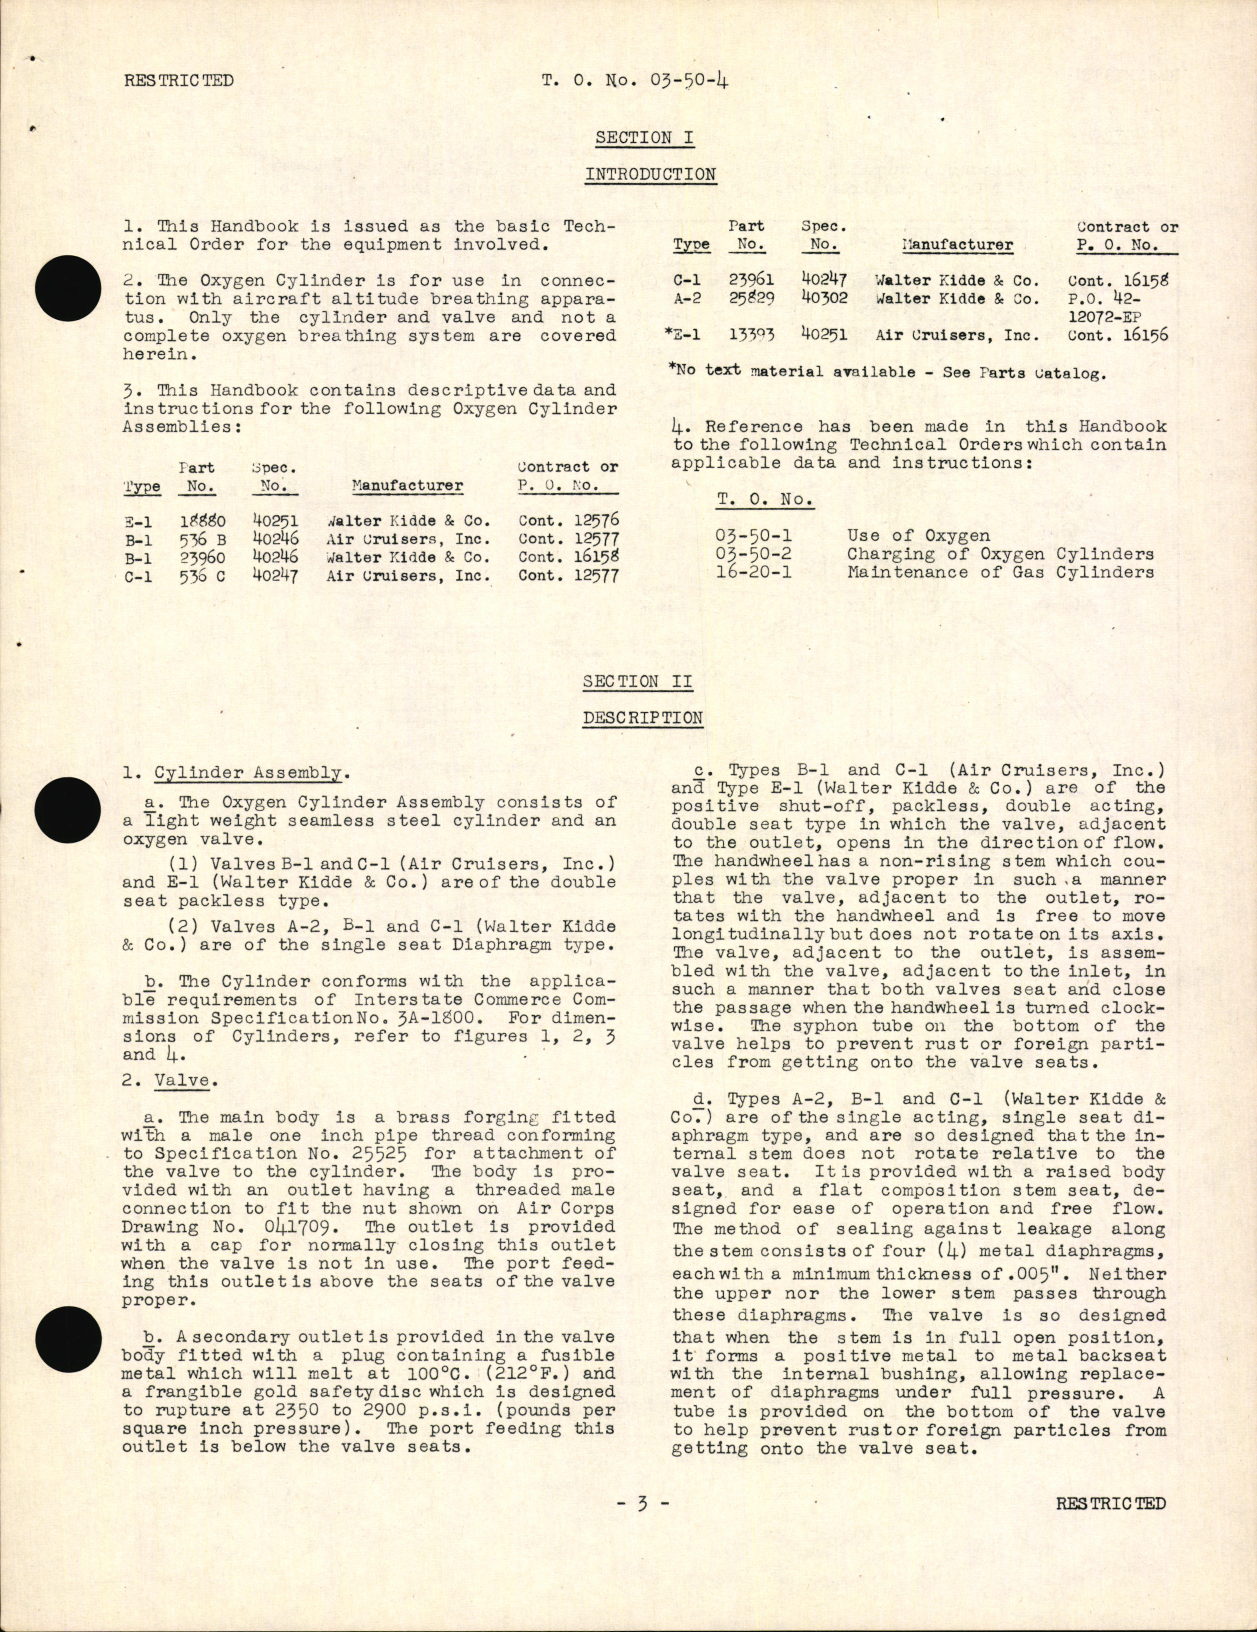 Sample page 5 from AirCorps Library document: Handbook of Instructions with Parts Catalog for Oxygen Cylinders